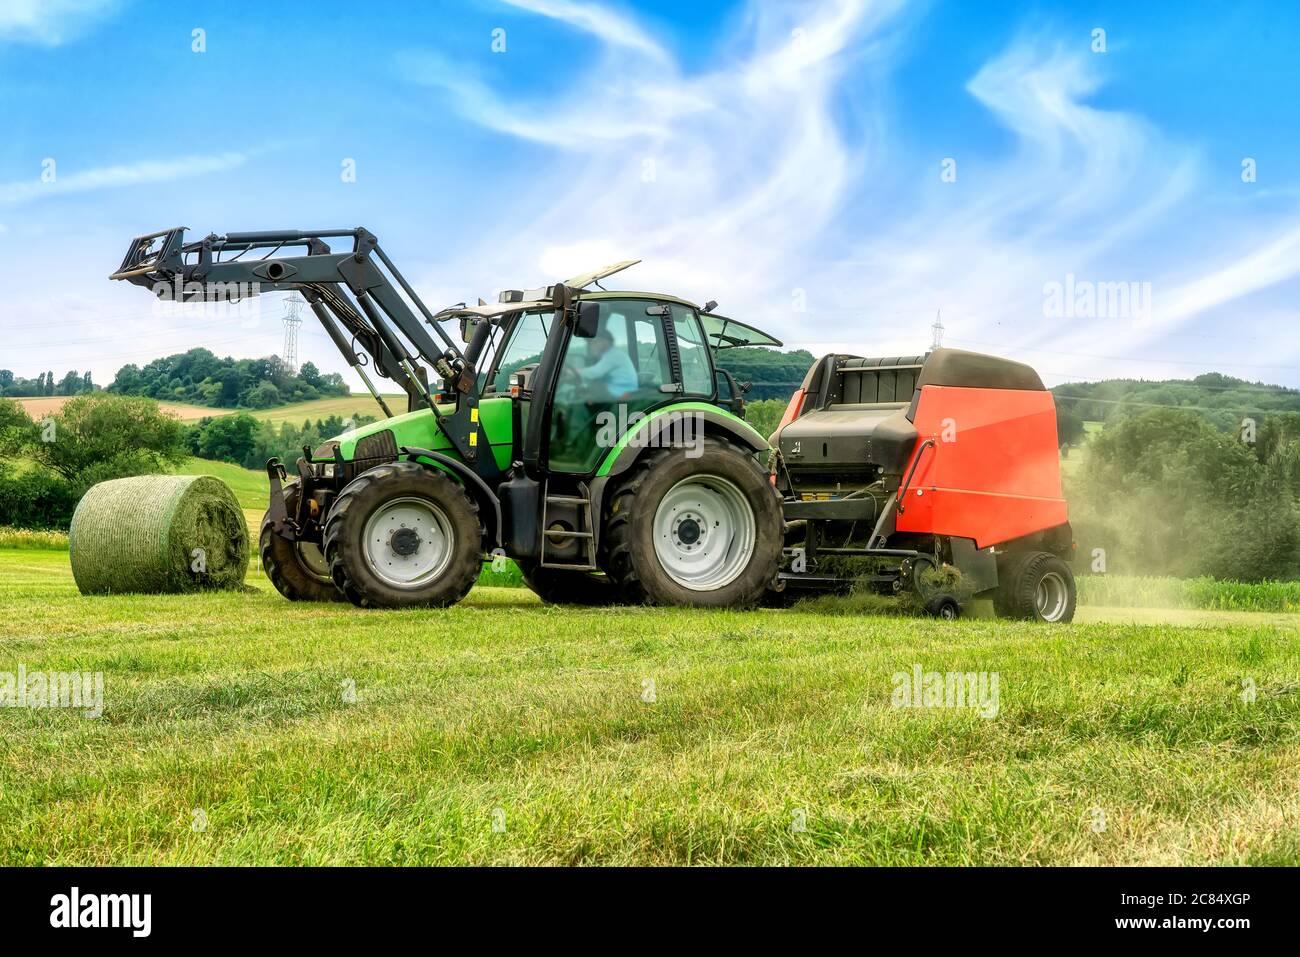 Big baler with film wrapper in use for grass silage preparation Stock Photo